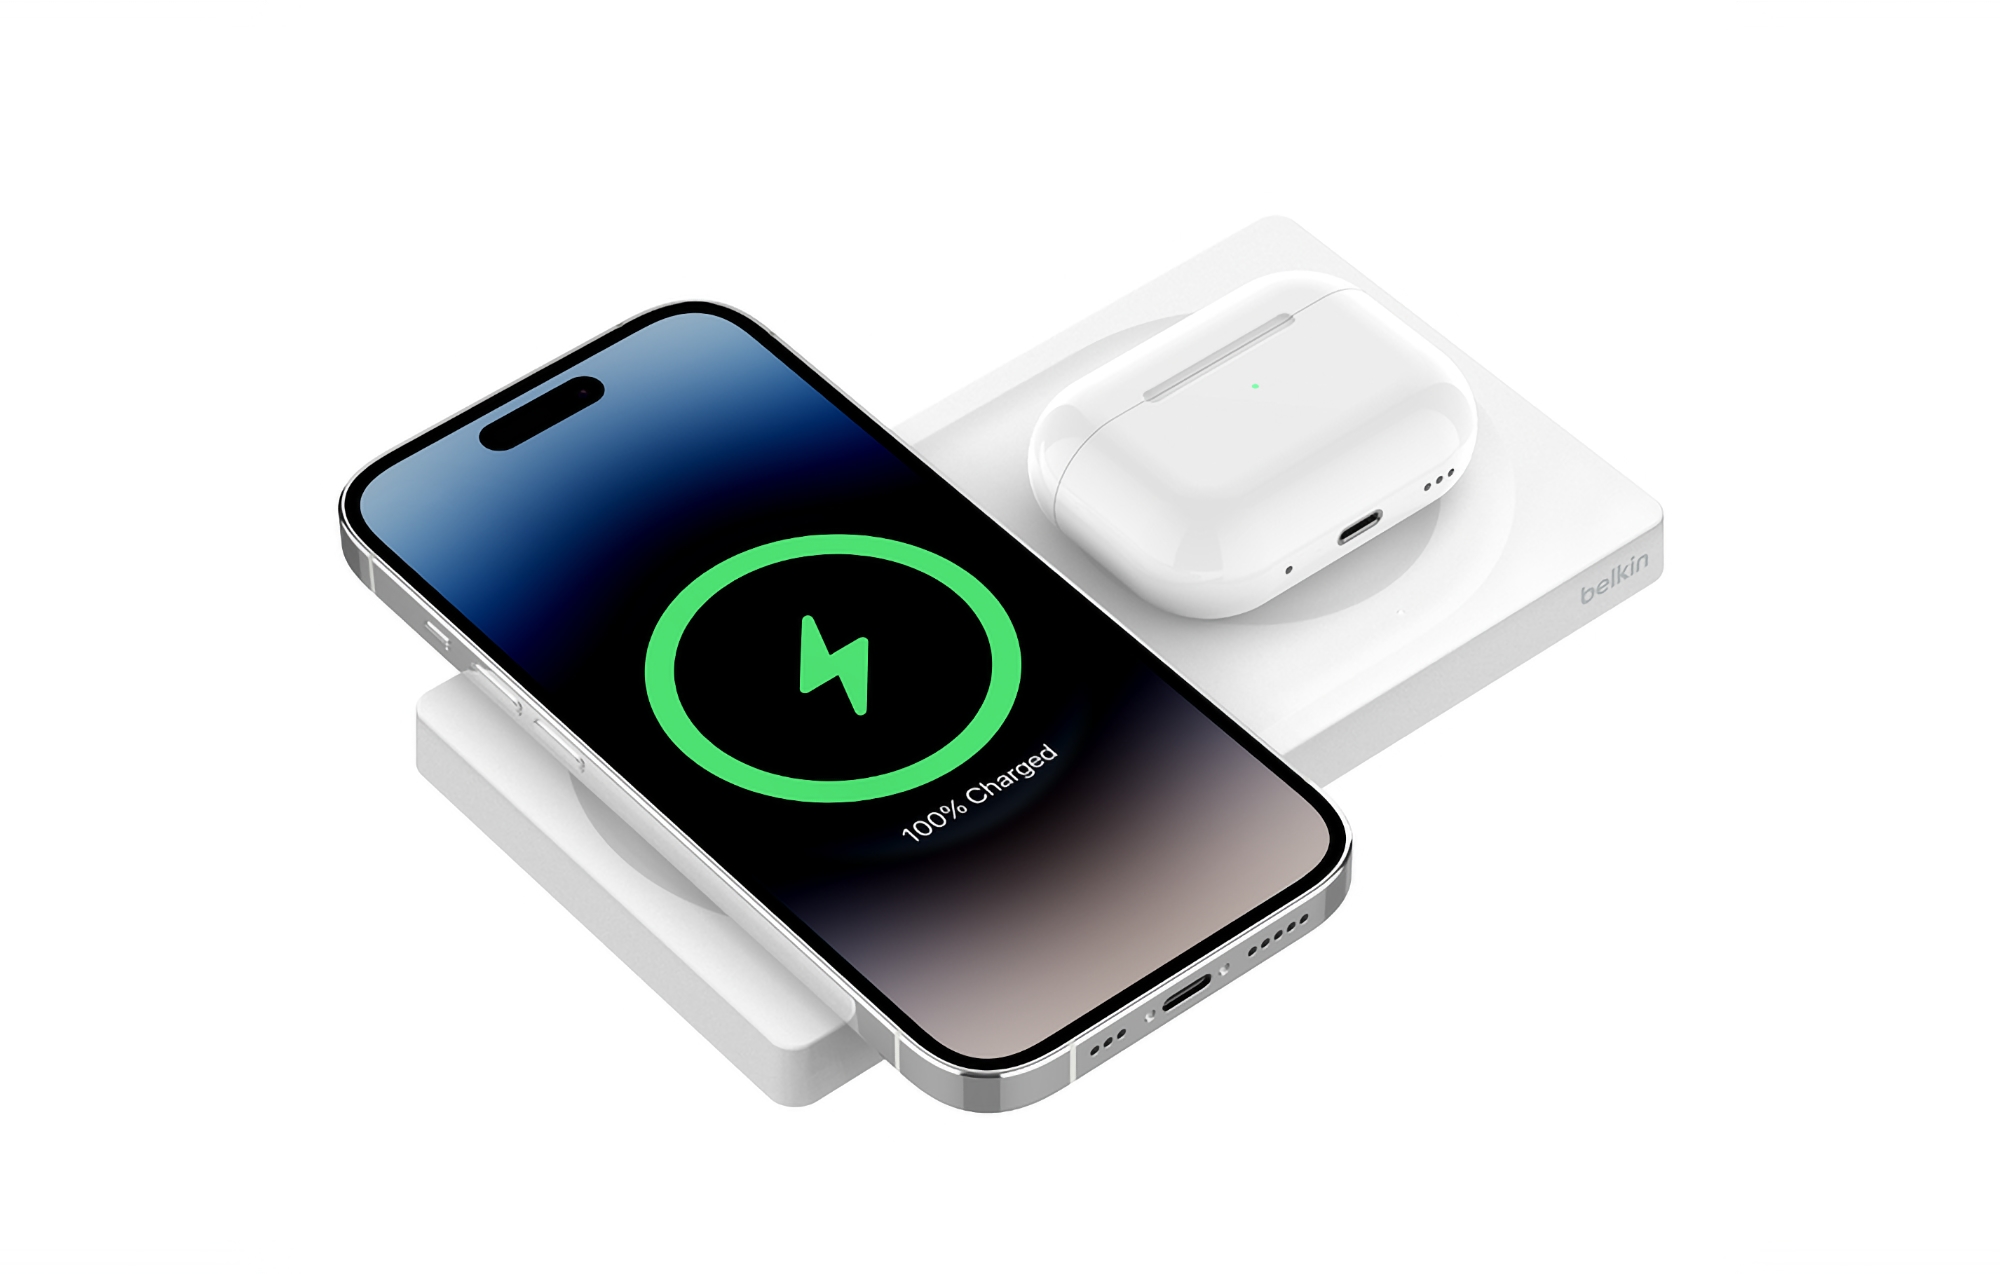 Belkin has introduced a new charging station for iPhones and AirPods with MagSafe support